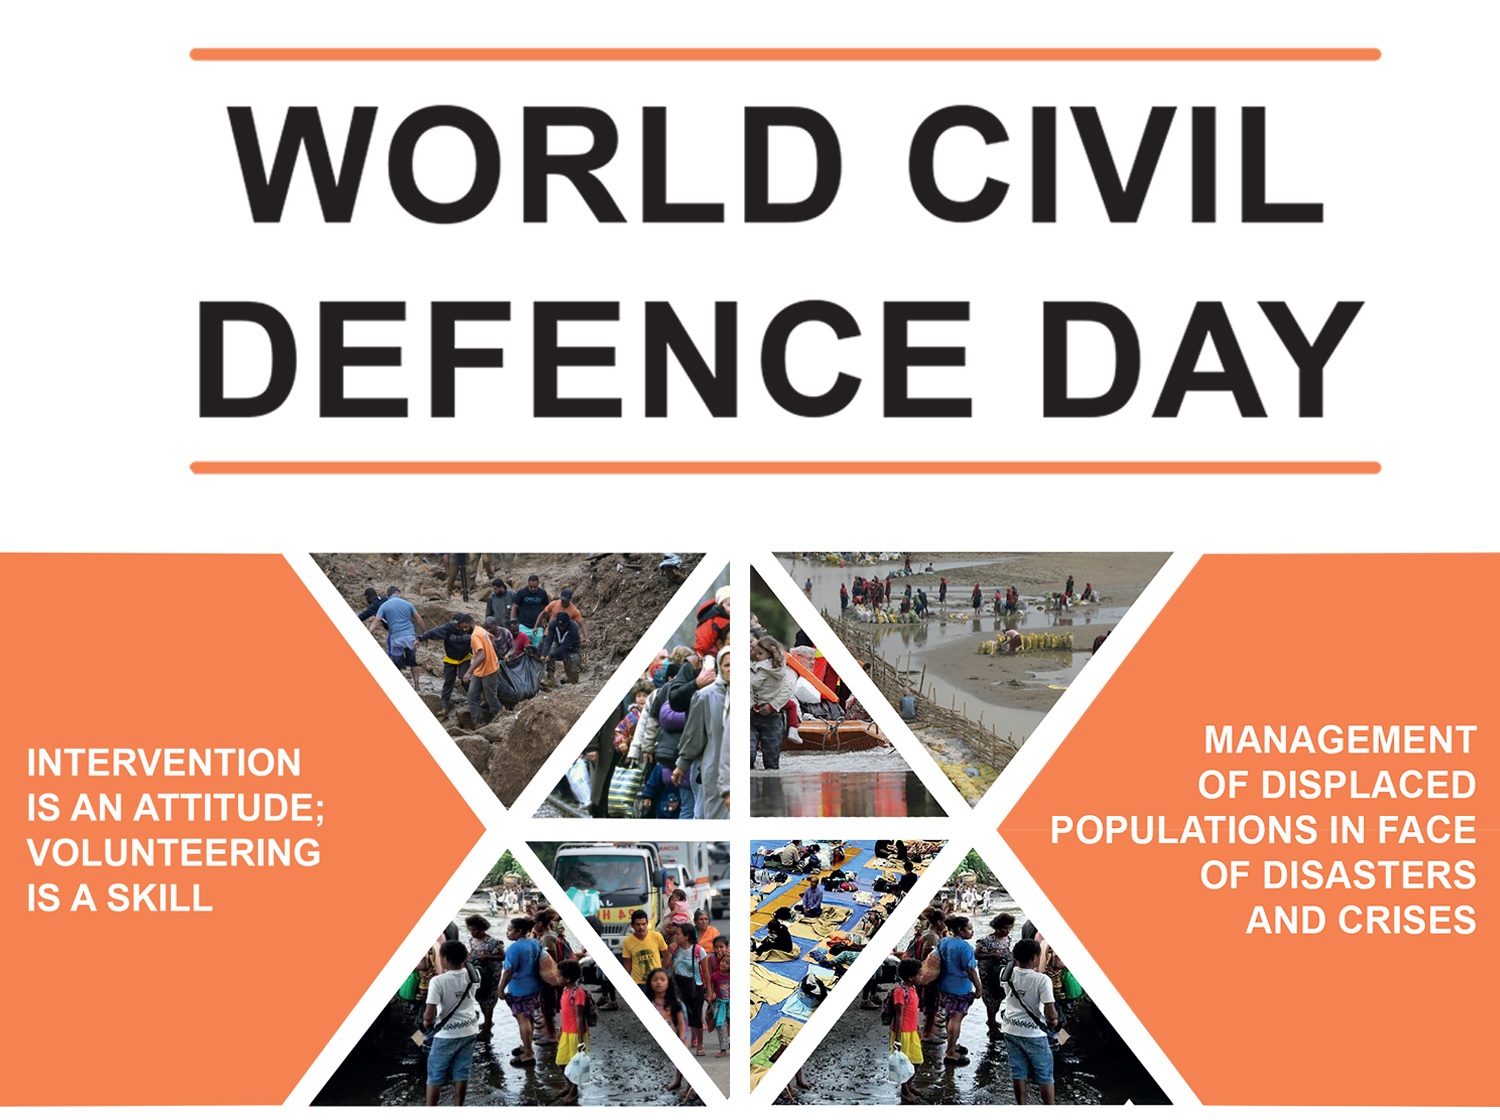 WORLD CIVIL DEFENCE DAY IN TAMIL